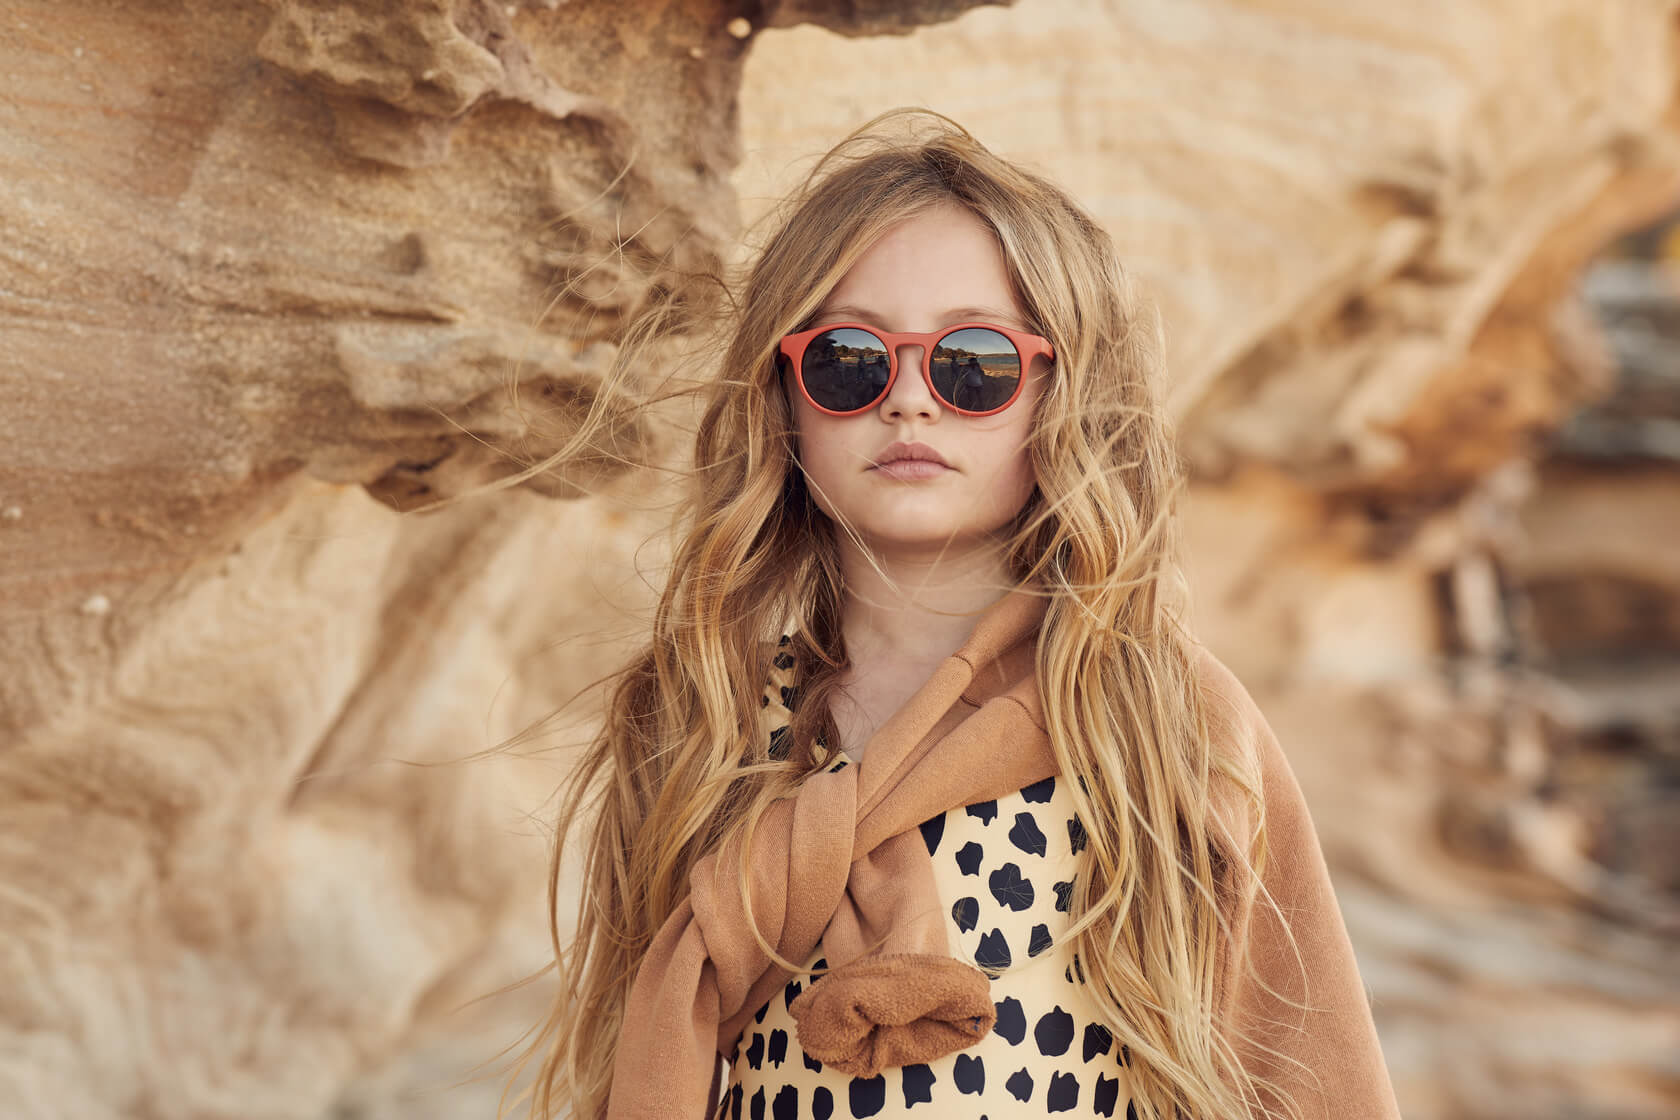 goose and dust kids fashion editorial